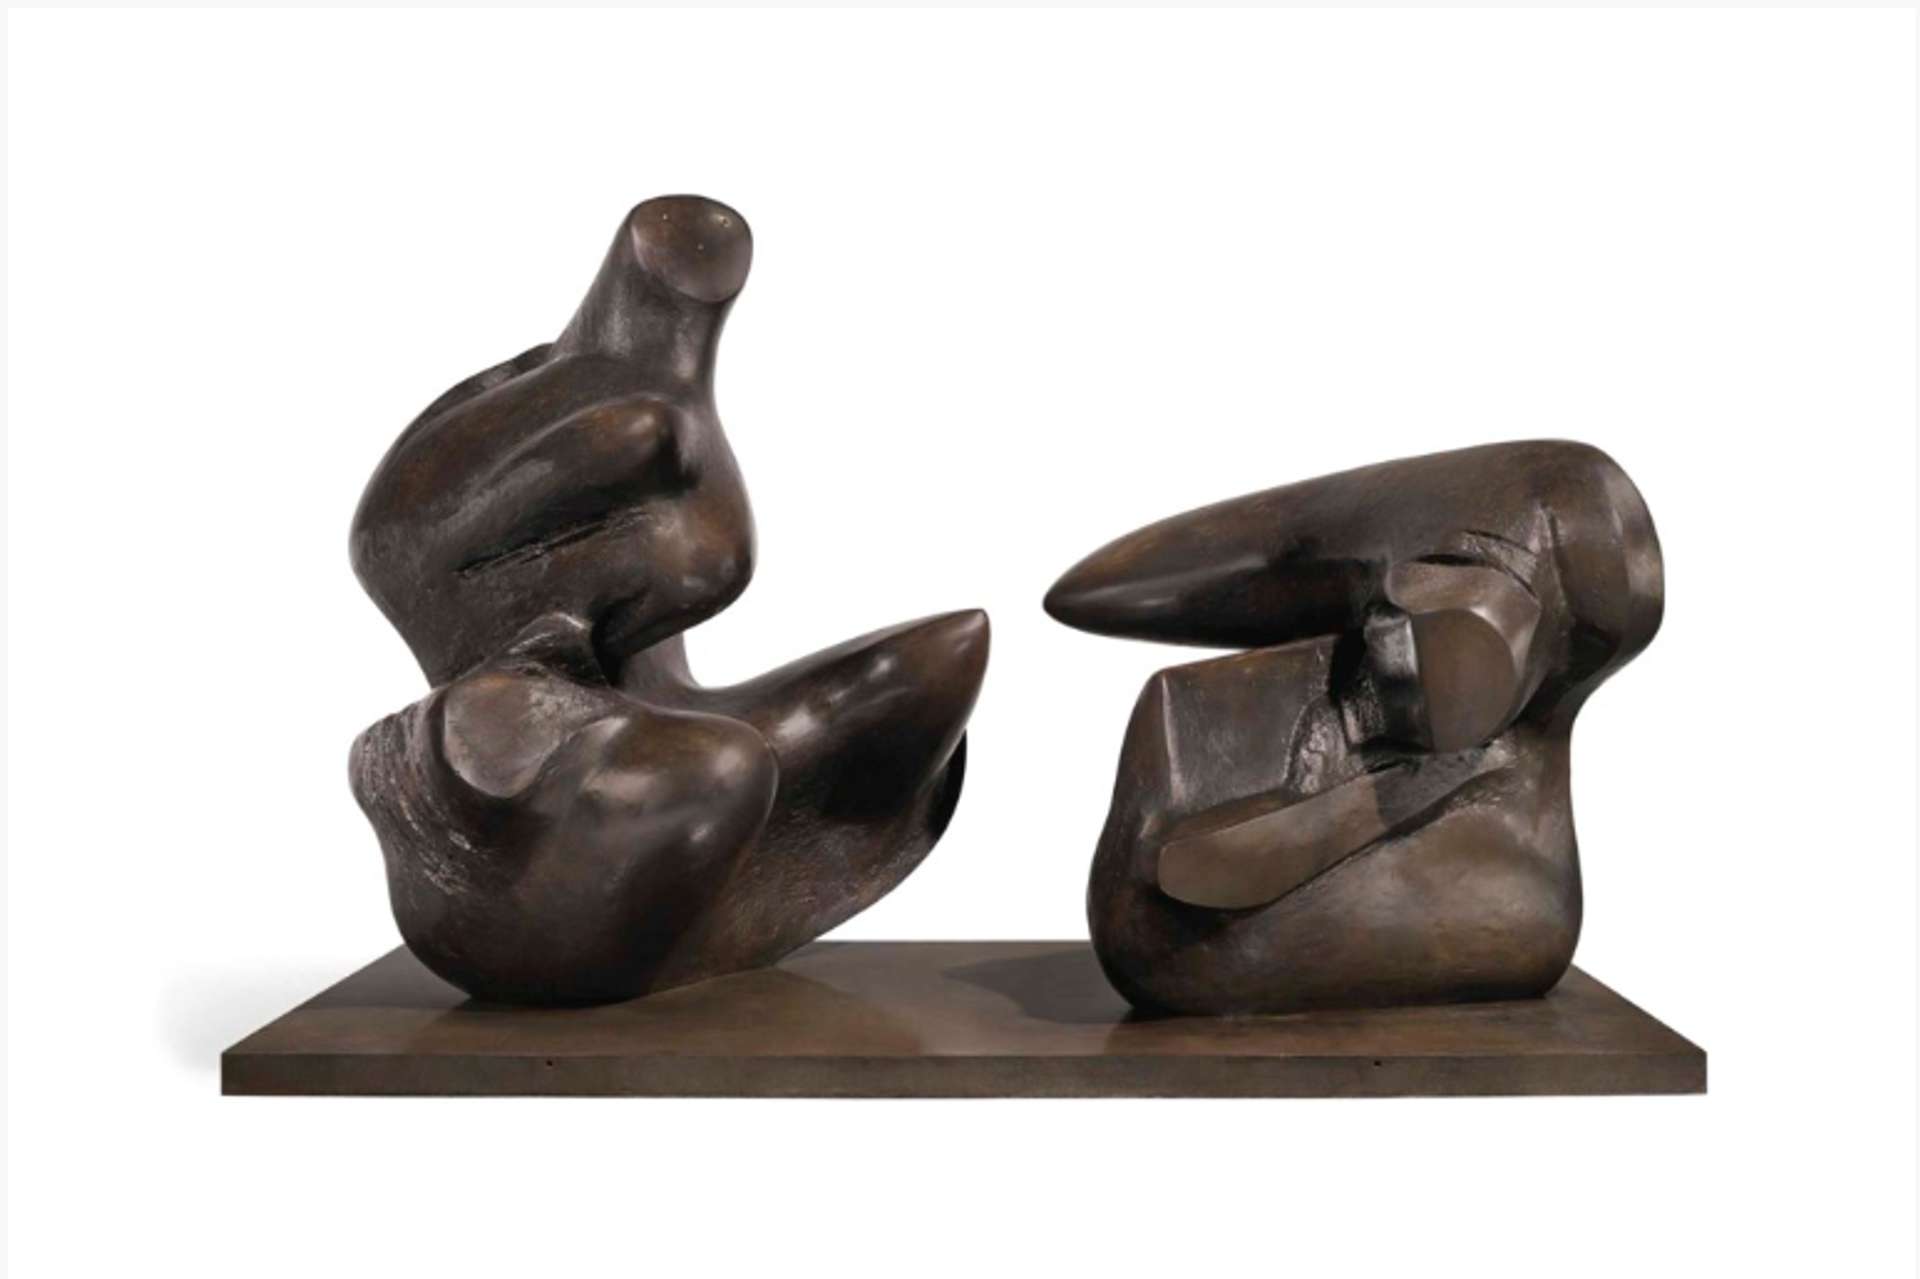 A bronze cast sculpture by Henry Moore portraying a biomorphic reclining figure through two distinct and separated fragments. One fragment demonstrates vertical protrusion, skillfully depicting a balanced composition from its base. The other fragment assumes a geometric form, standing at half the height of its counterpart. Both fragments are positioned on a bronze plinth.